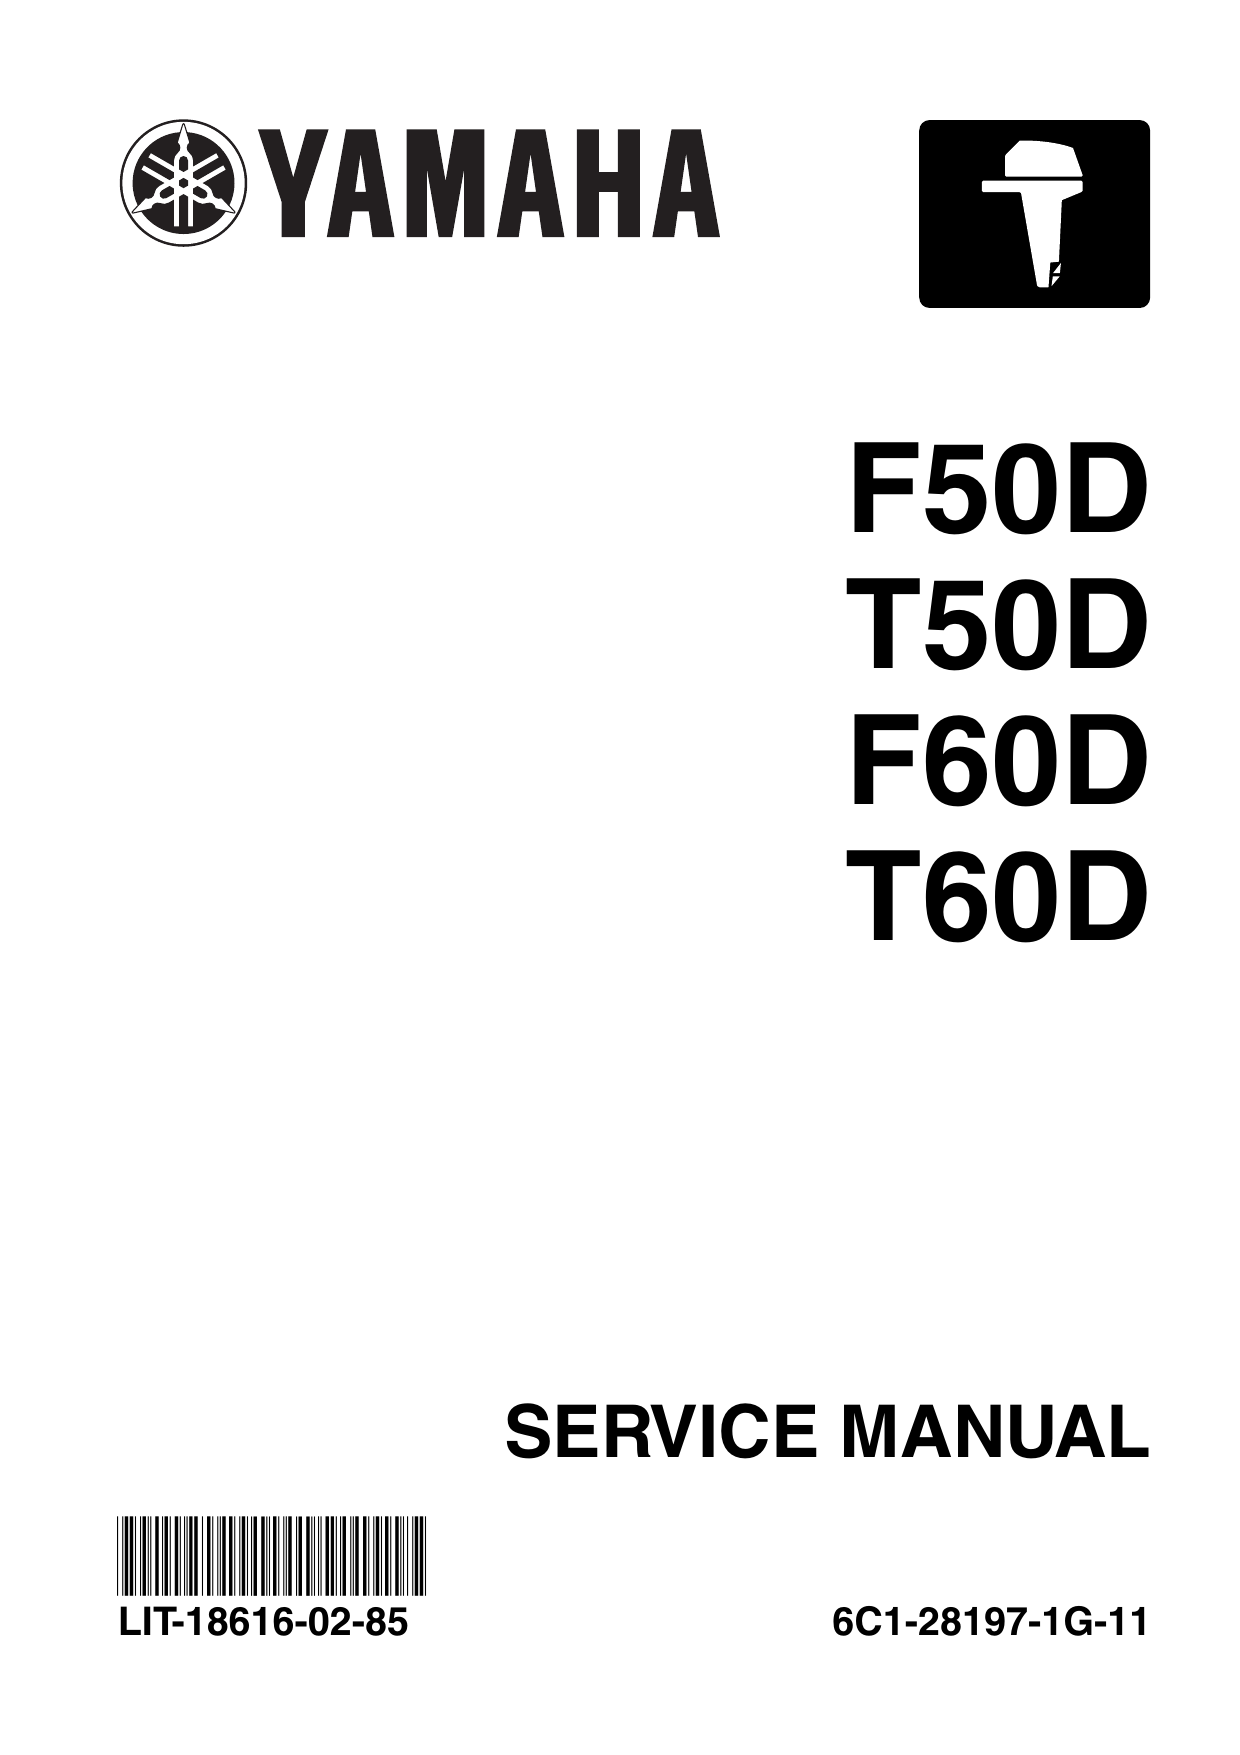 2005 Yamaha F50D, T50D, F60D, T60D outboard motor service manual Preview image 1